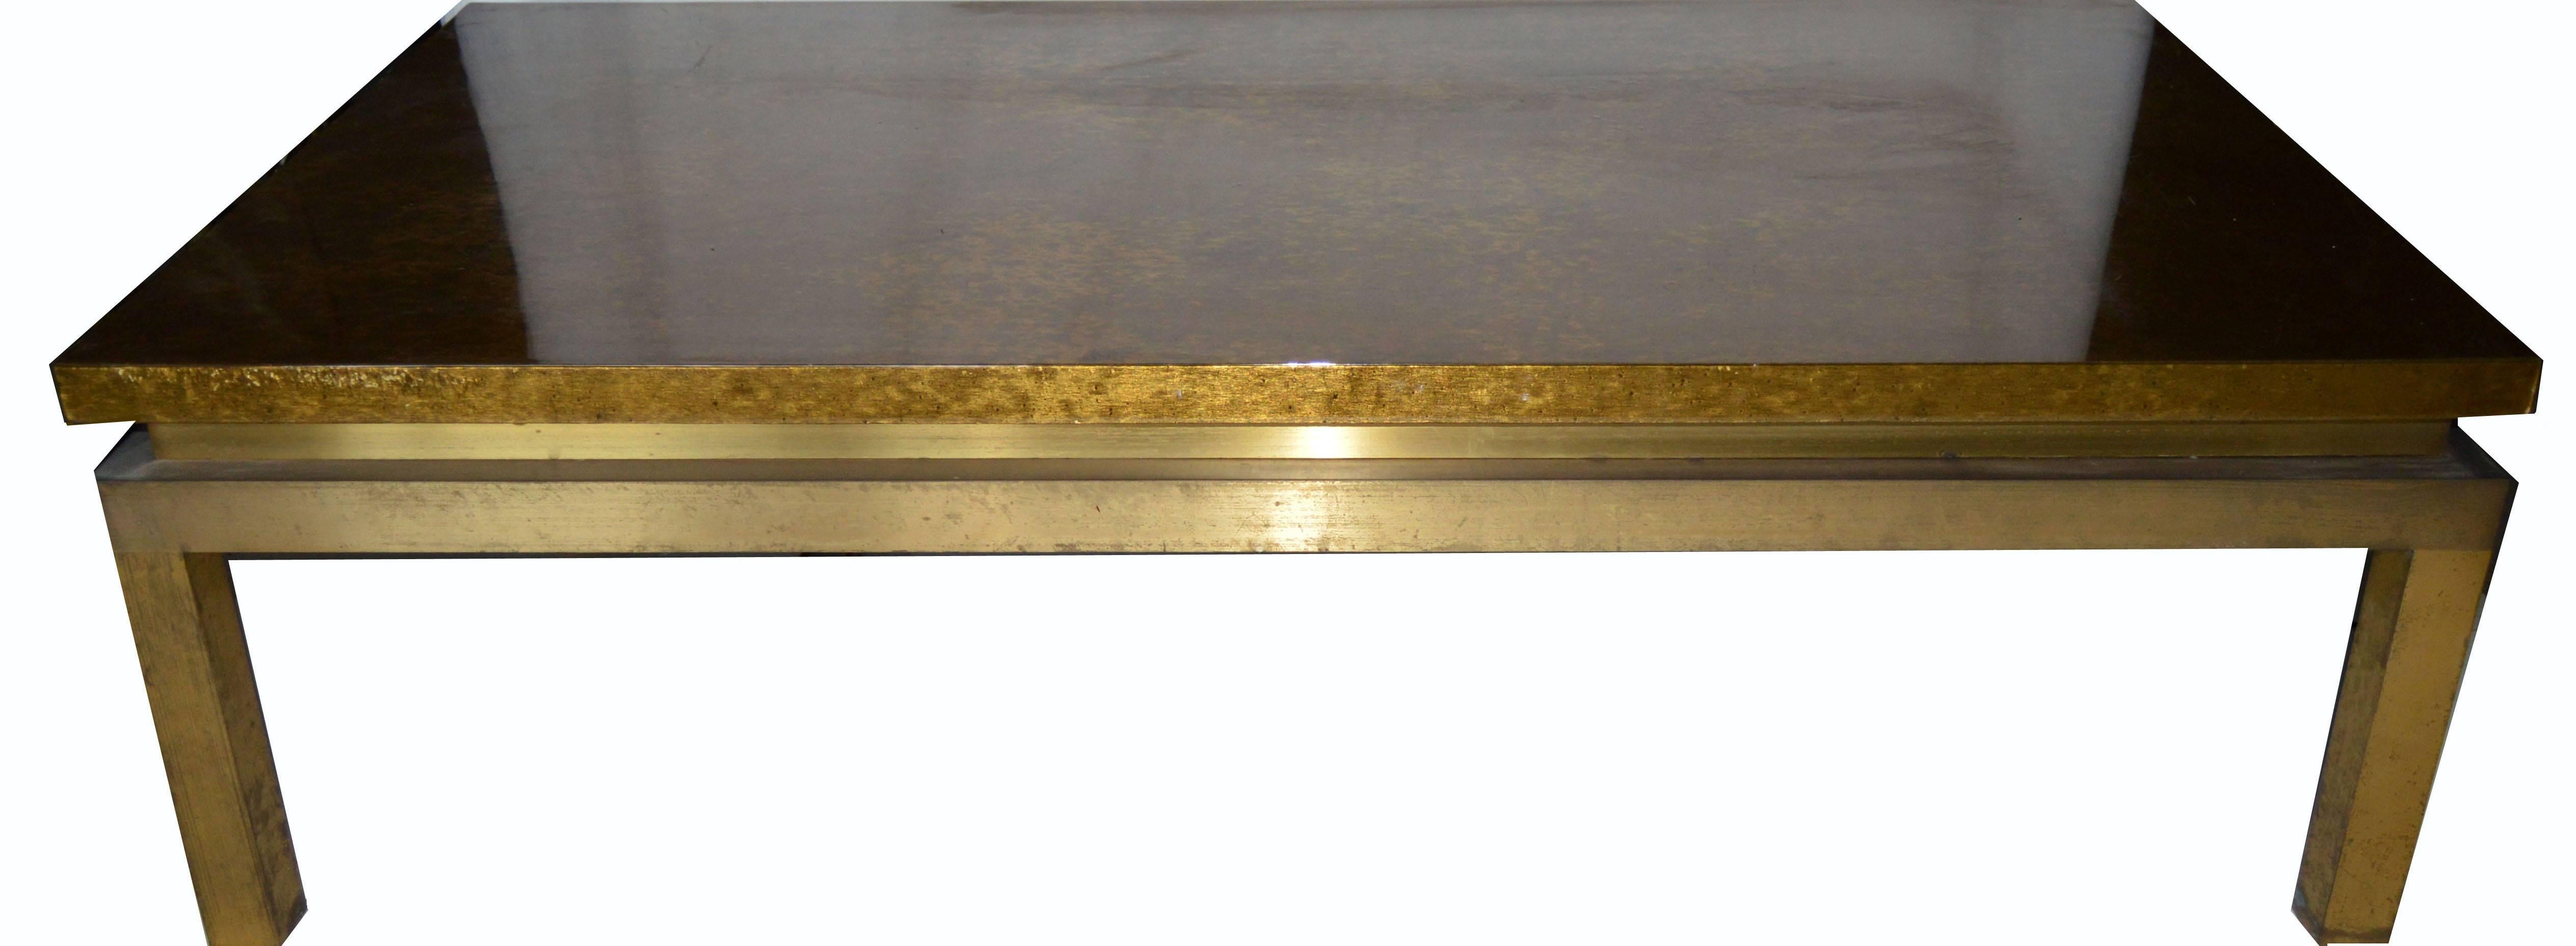 Superb coffee table by Maison Jansen, gold leaf on wood top with a thick clear lacquer, bronze frame and legs.